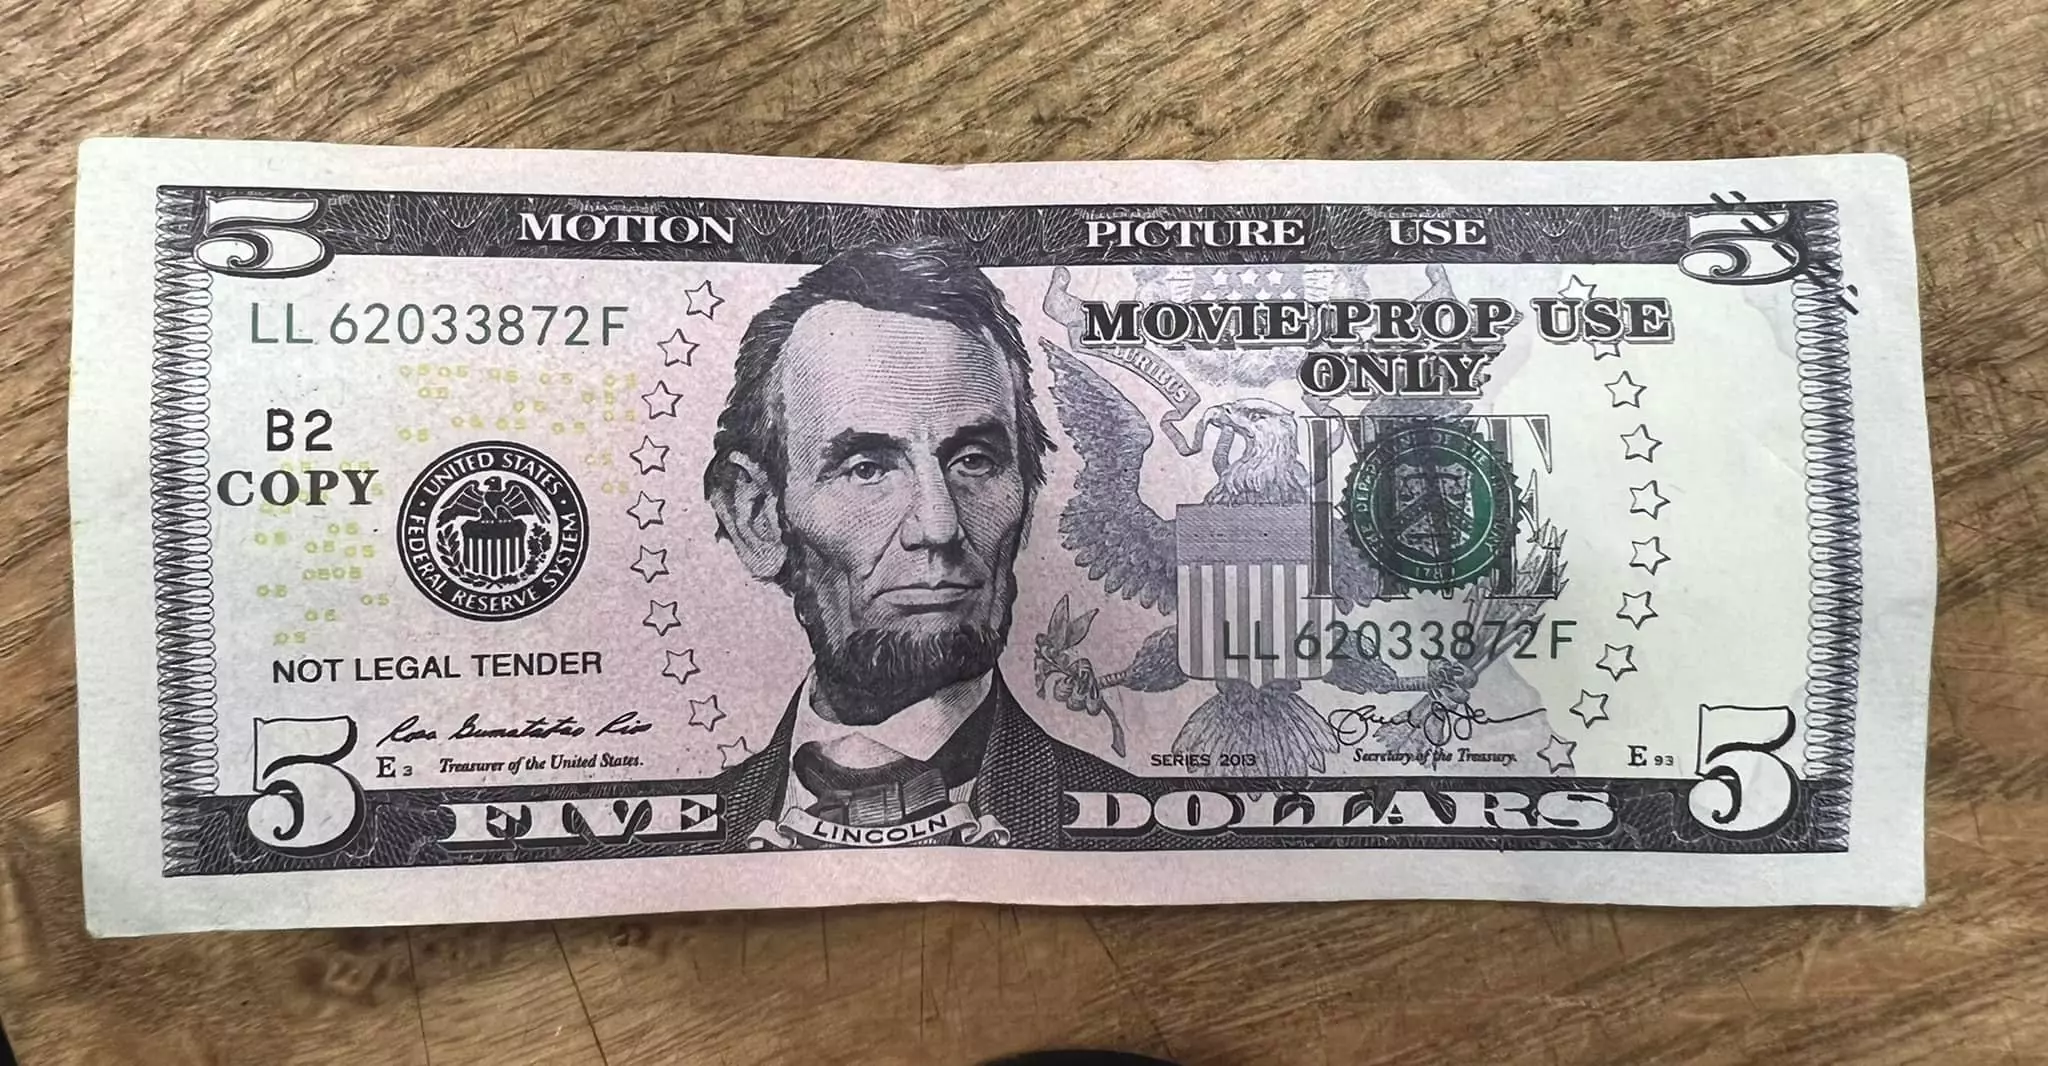 9 ways to spot counterfeit money, after fake $100 bill yields warning -   - Local news, Weather, Sports, Free Classifieds and  Business Listings for the Estevan, Saskatchewan